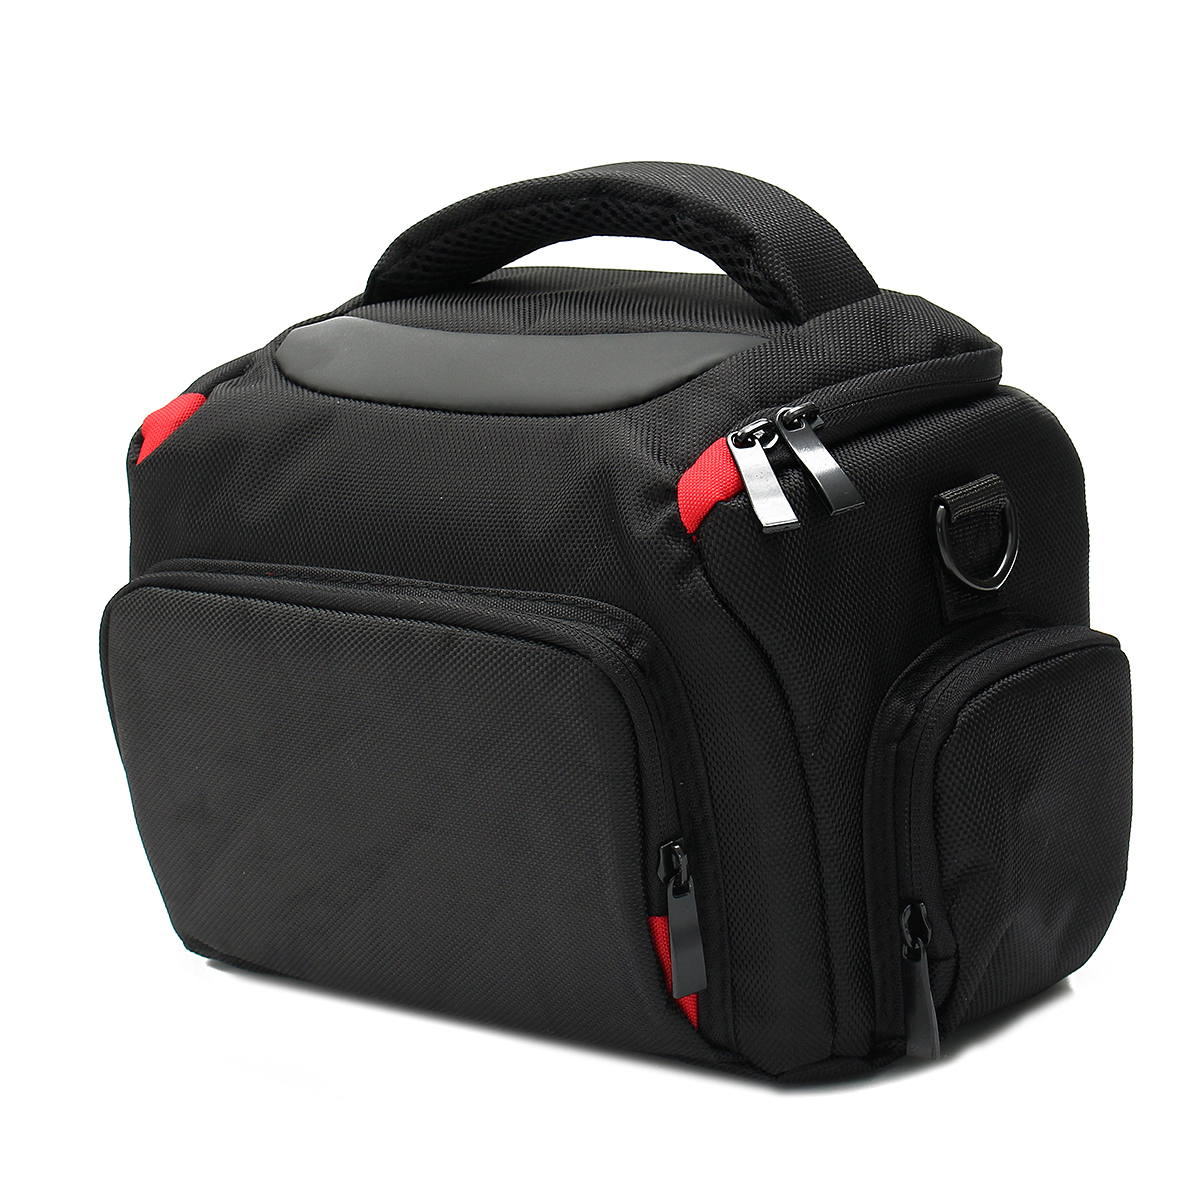 Find Camera Storage Travel Carry Bag with Rain Cover Strap for DSLR SLR Camera Camera Lens Flash for Sale on Gipsybee.com with cryptocurrencies